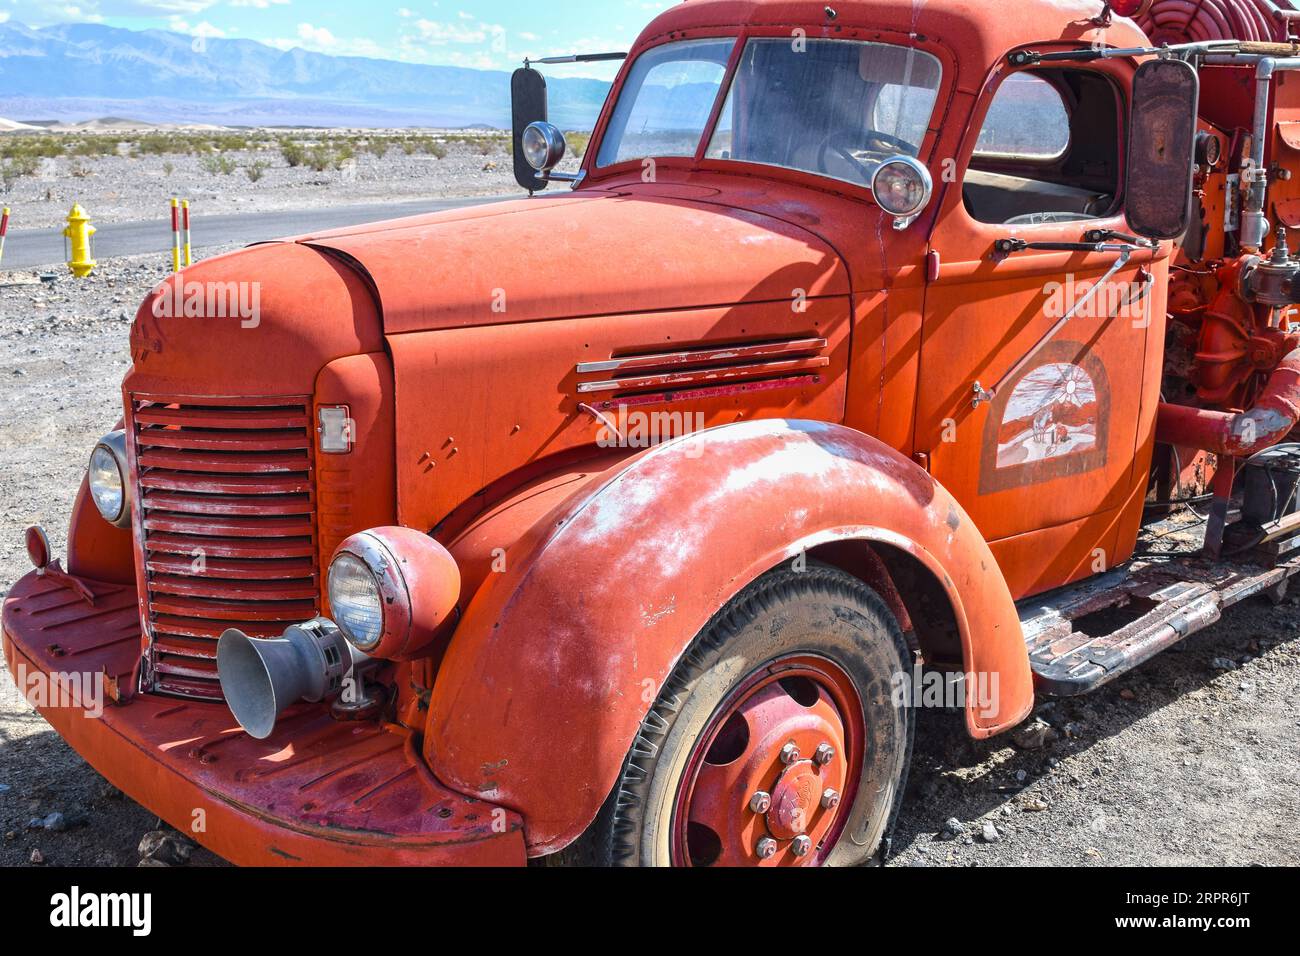 STOVEPIPE WELLS, CA, USA - MARCH 17, 2016: Old-timer fire-fighting vehicle in Stovepipe Wells, Death Valley National Park, California. The National Pa Stock Photo